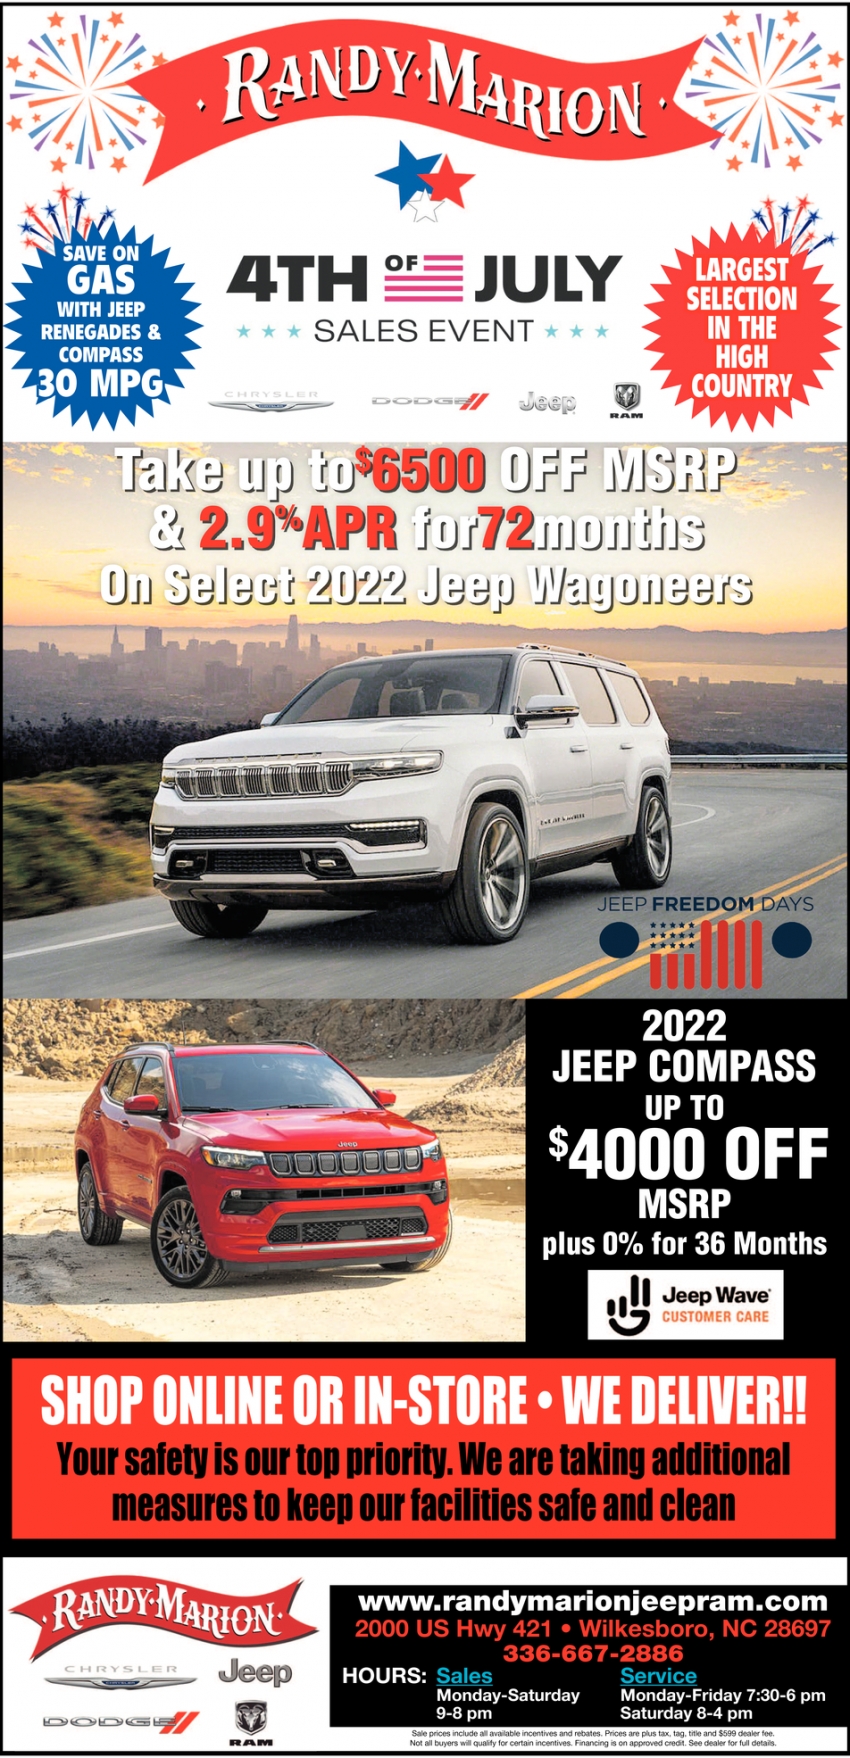 4th of July Sales Event